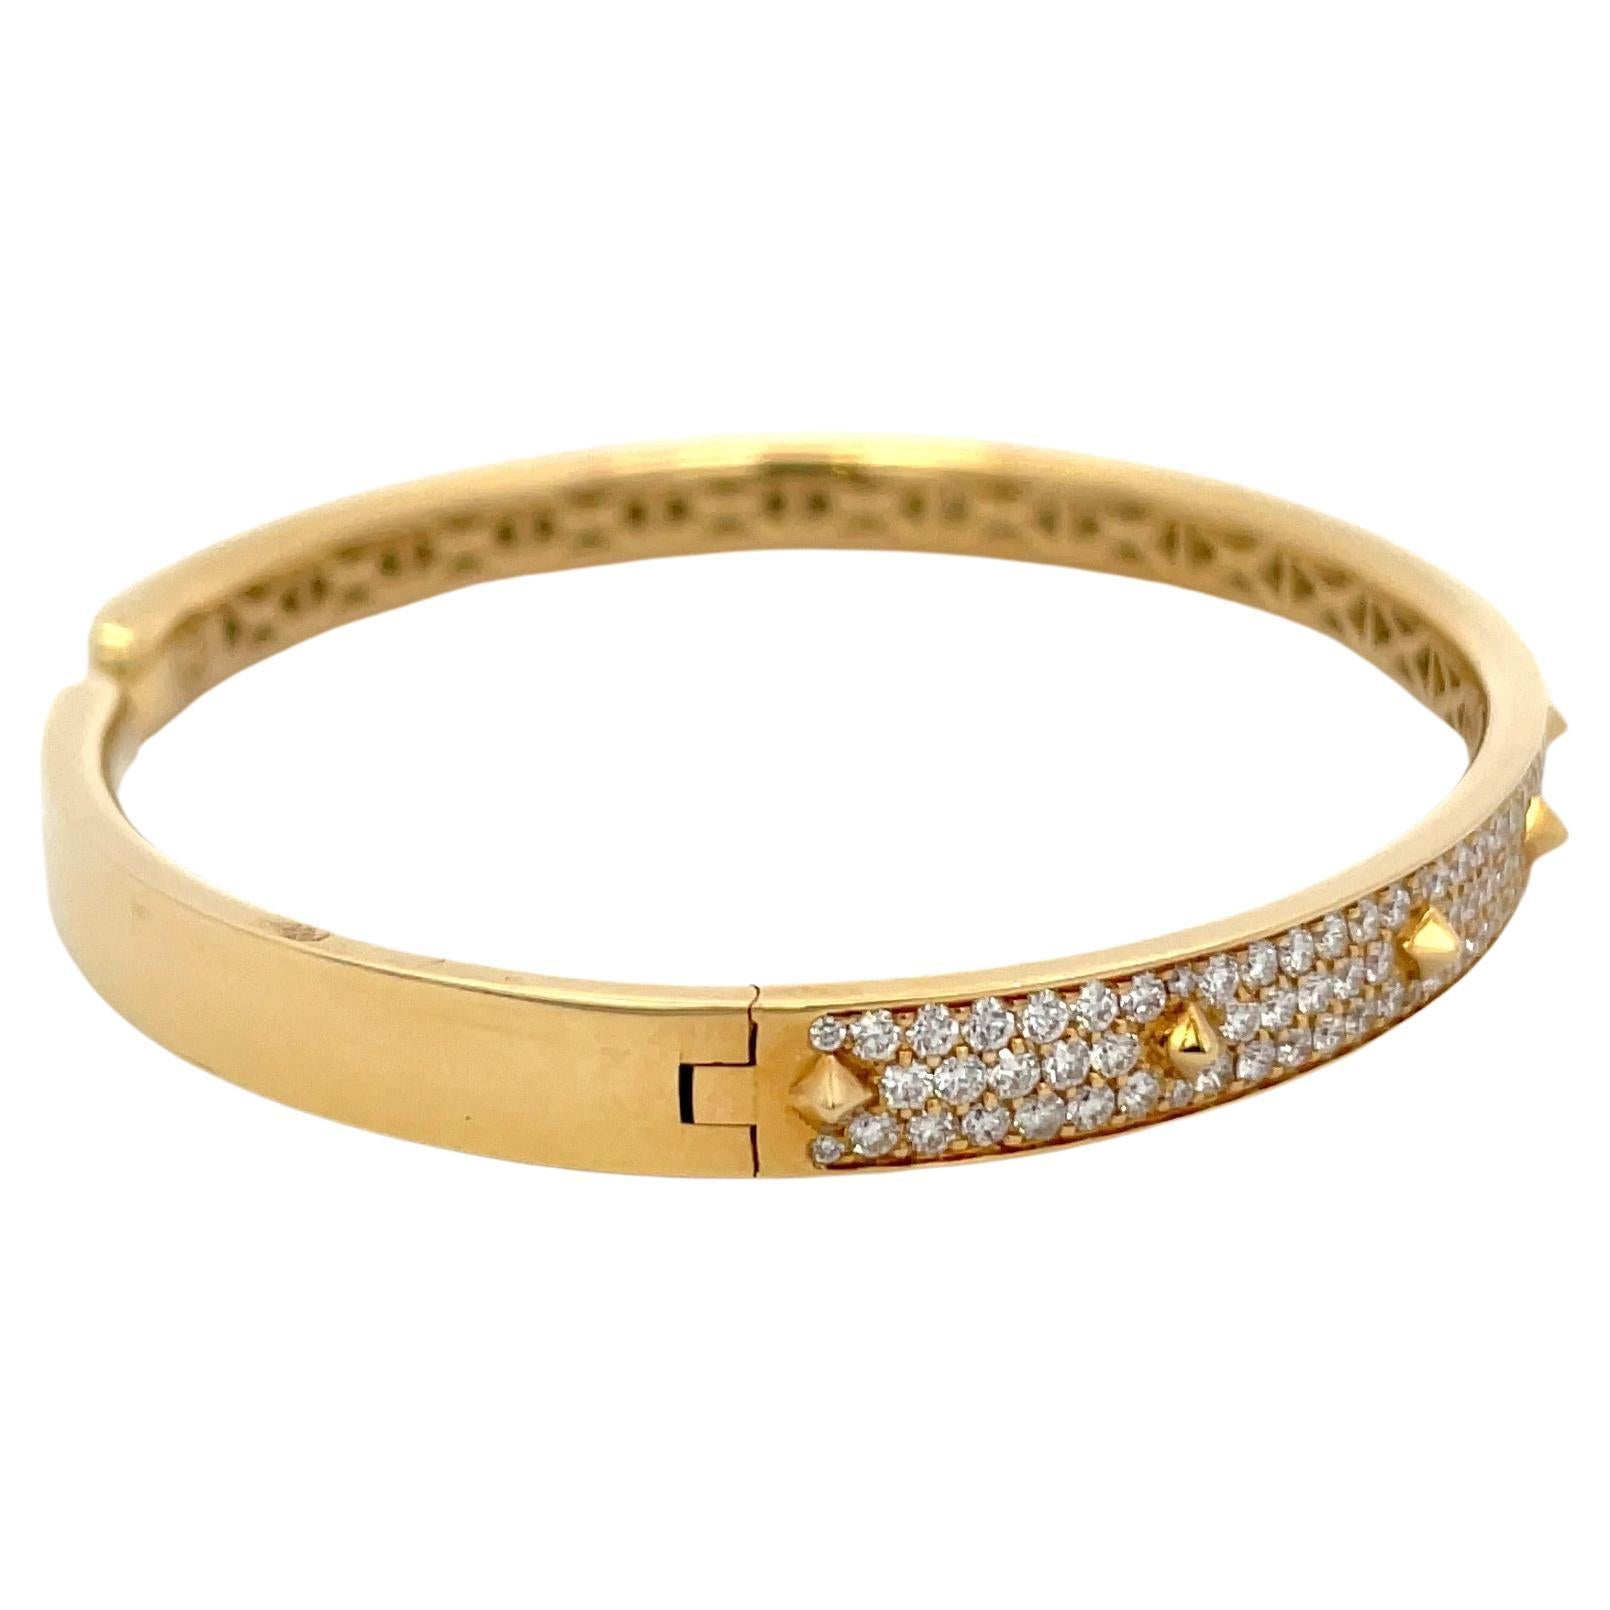 Italian, 18 Karat yellow gold bangle bracelet featuring 3 rows of diamonds and spike motifs weighing 1.75 carats. 
Color F
Clarity VS
Designer: Crivelli Jewelry 

Super cool, great for layering or wear alone! 
Matching Earrings
DM for more videos 